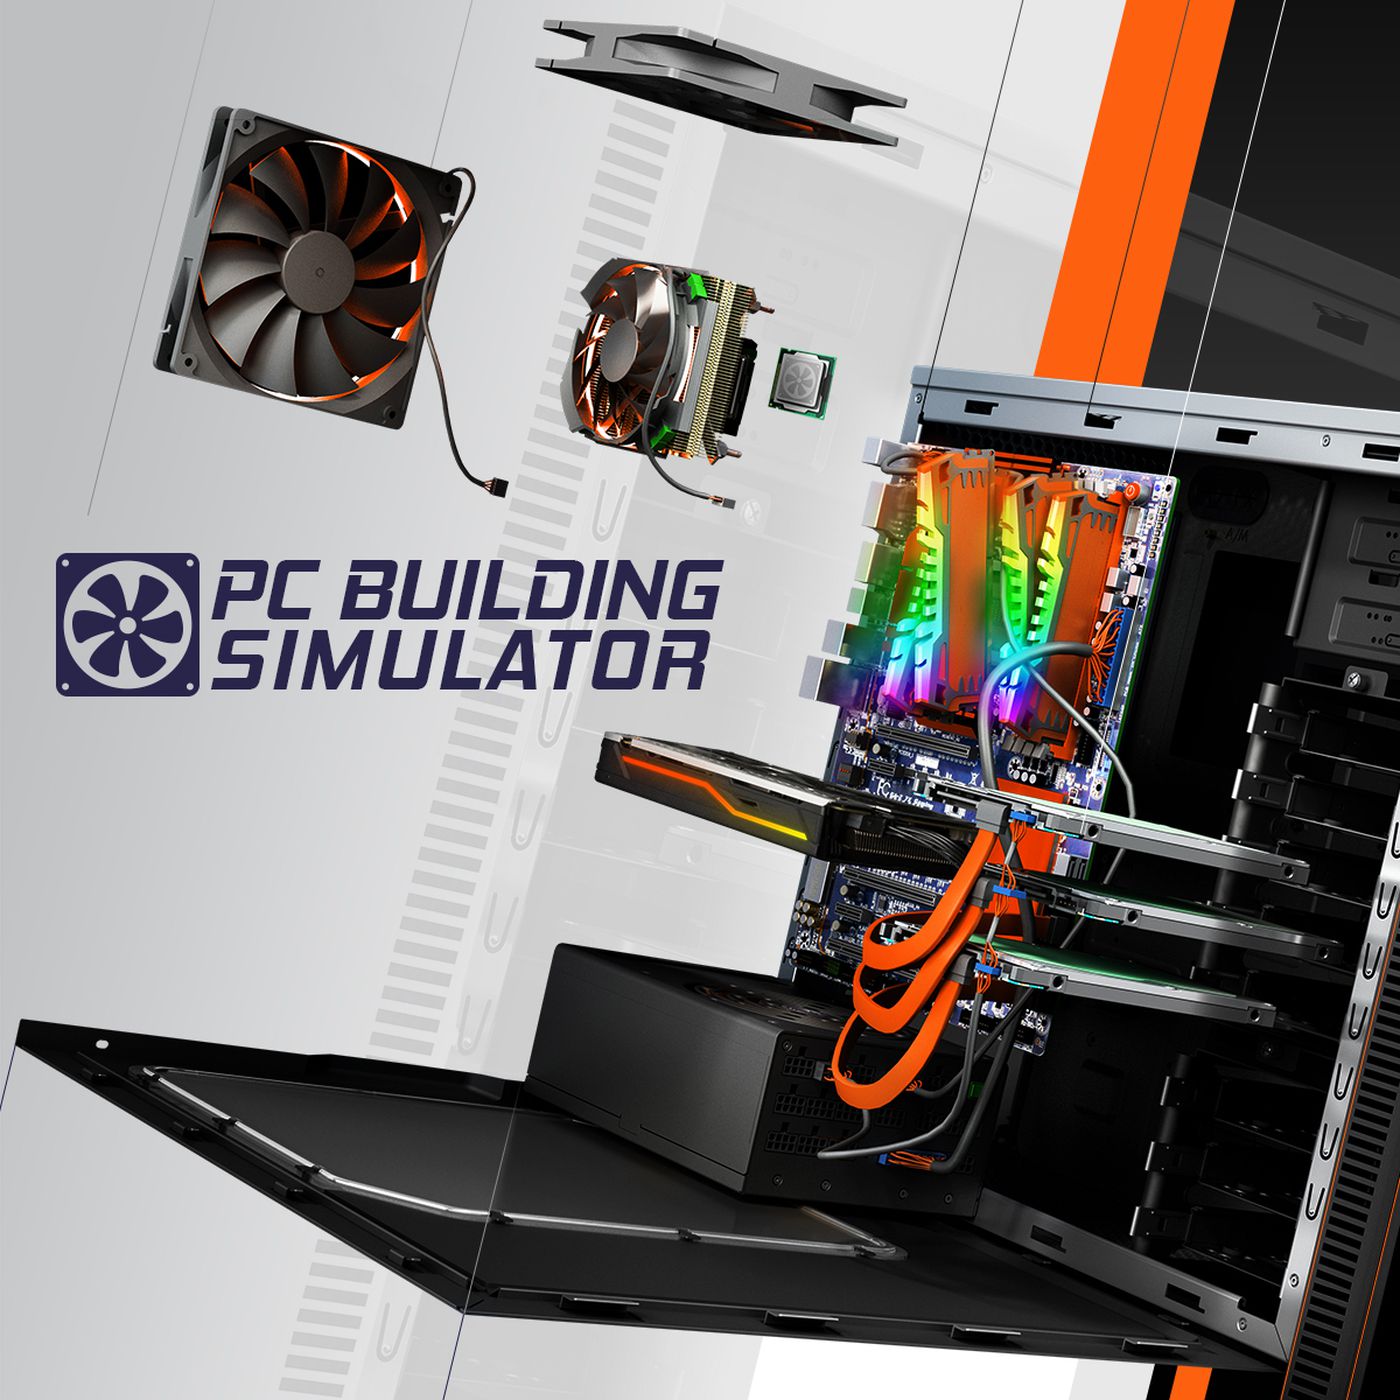 PC Building Simulator is free on the Epic Games Store